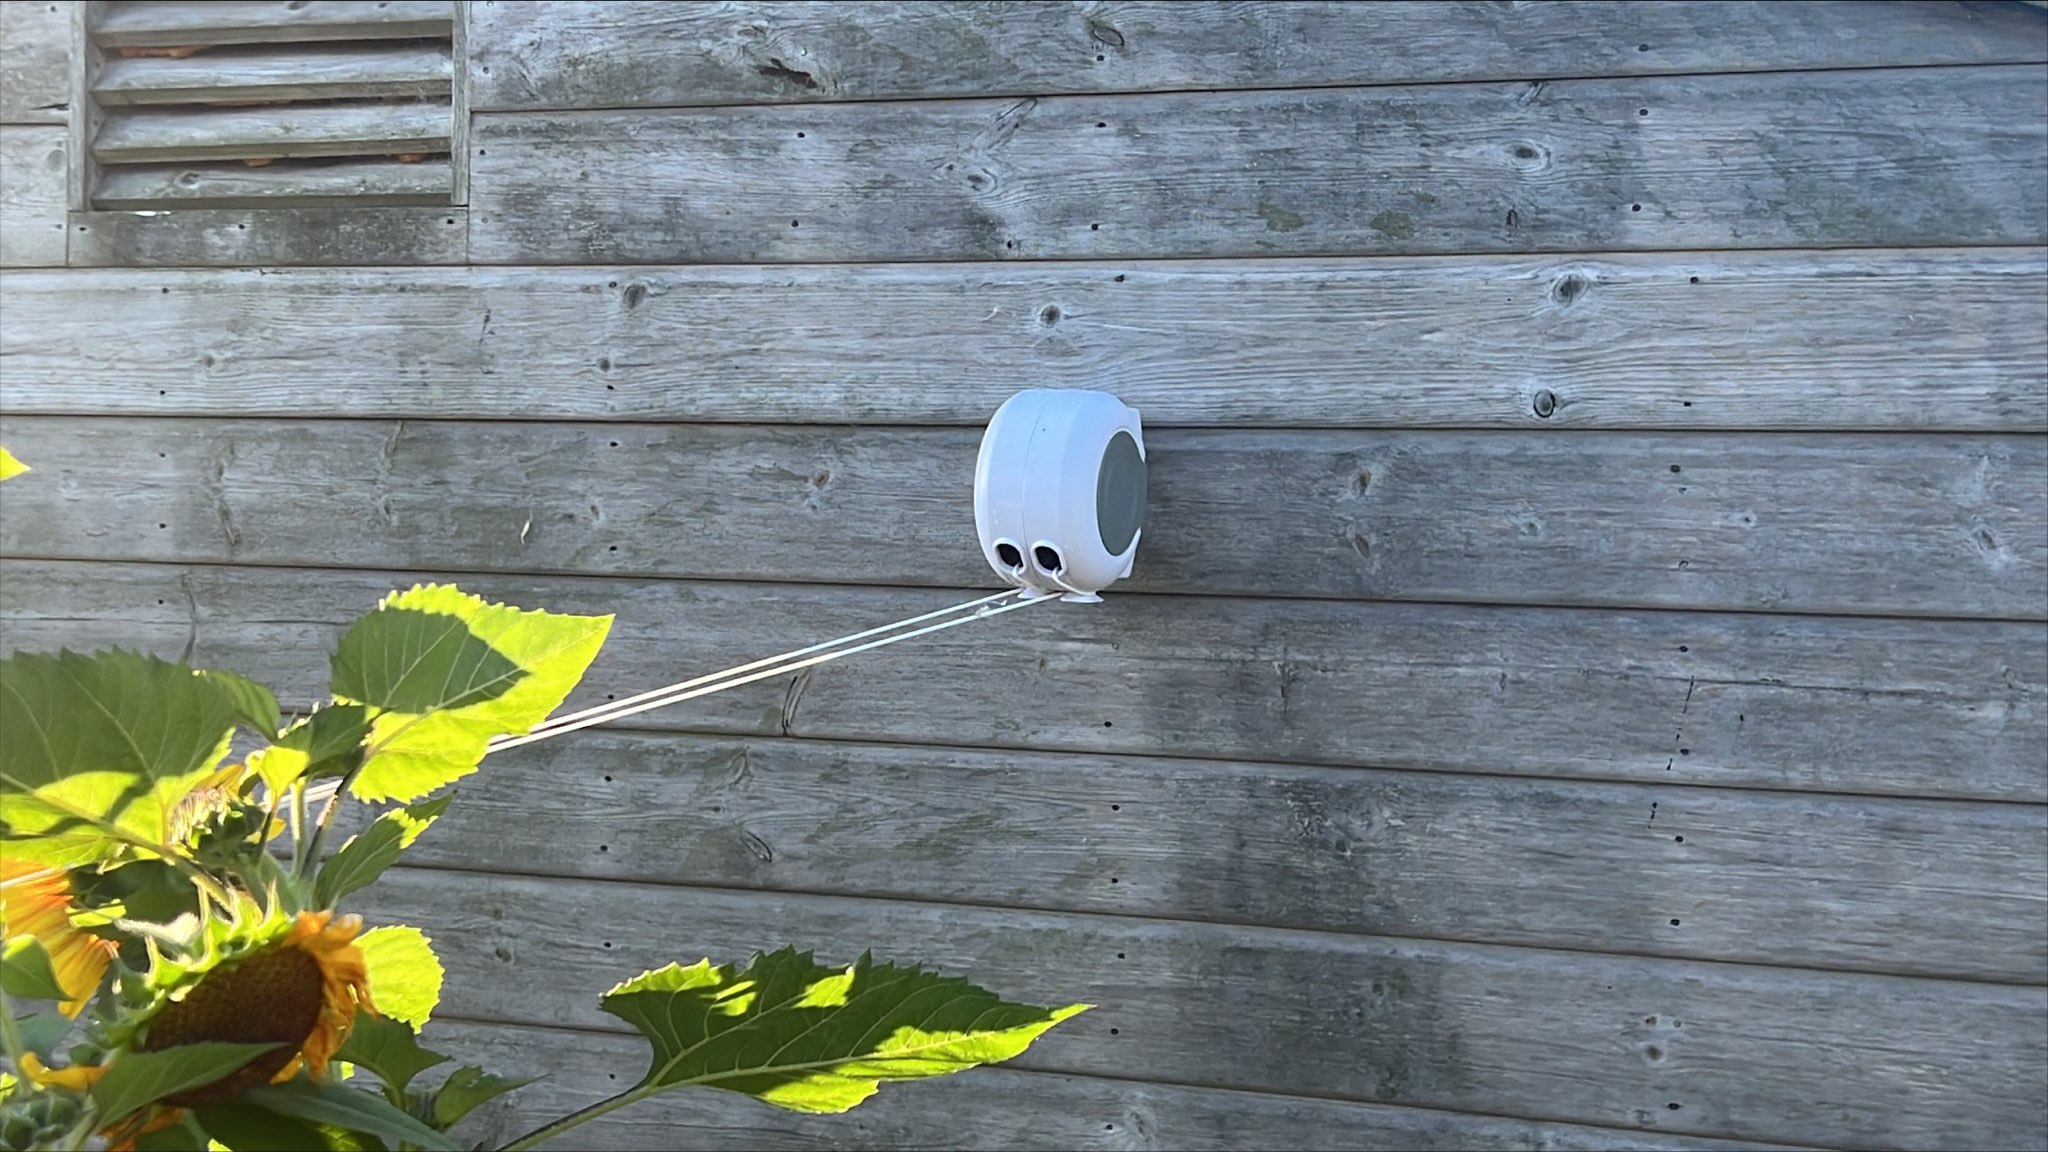 UK's Best retractable washing line that are heavy duty and automatic for  practical clothes drying. » Shetland's Garden Tool Box